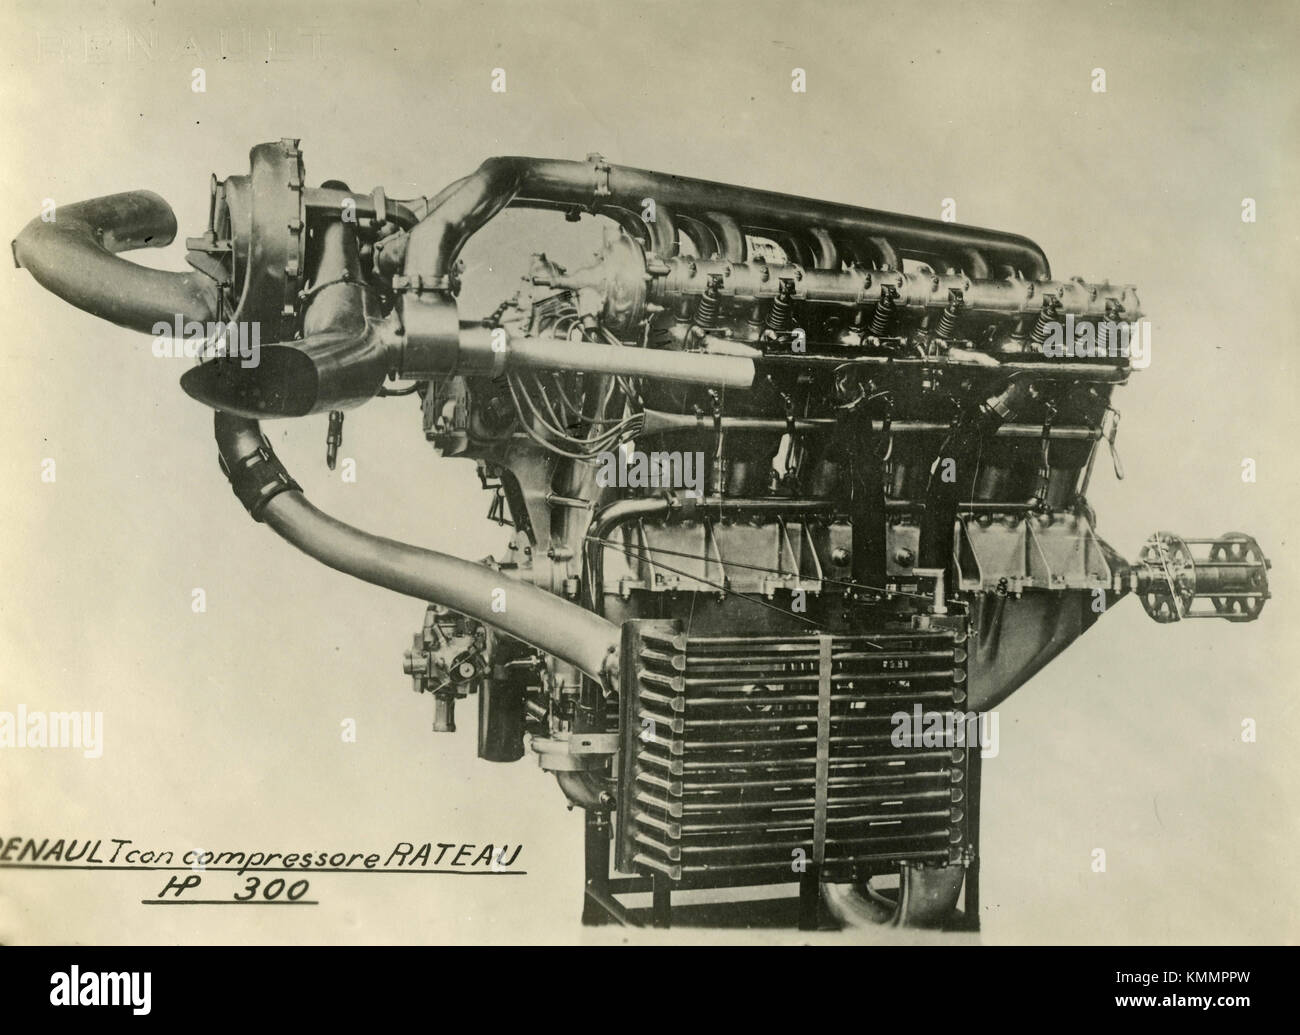 Aircraft engine Renault Turbo Rateau HP 300, France 1920s Stock Photo